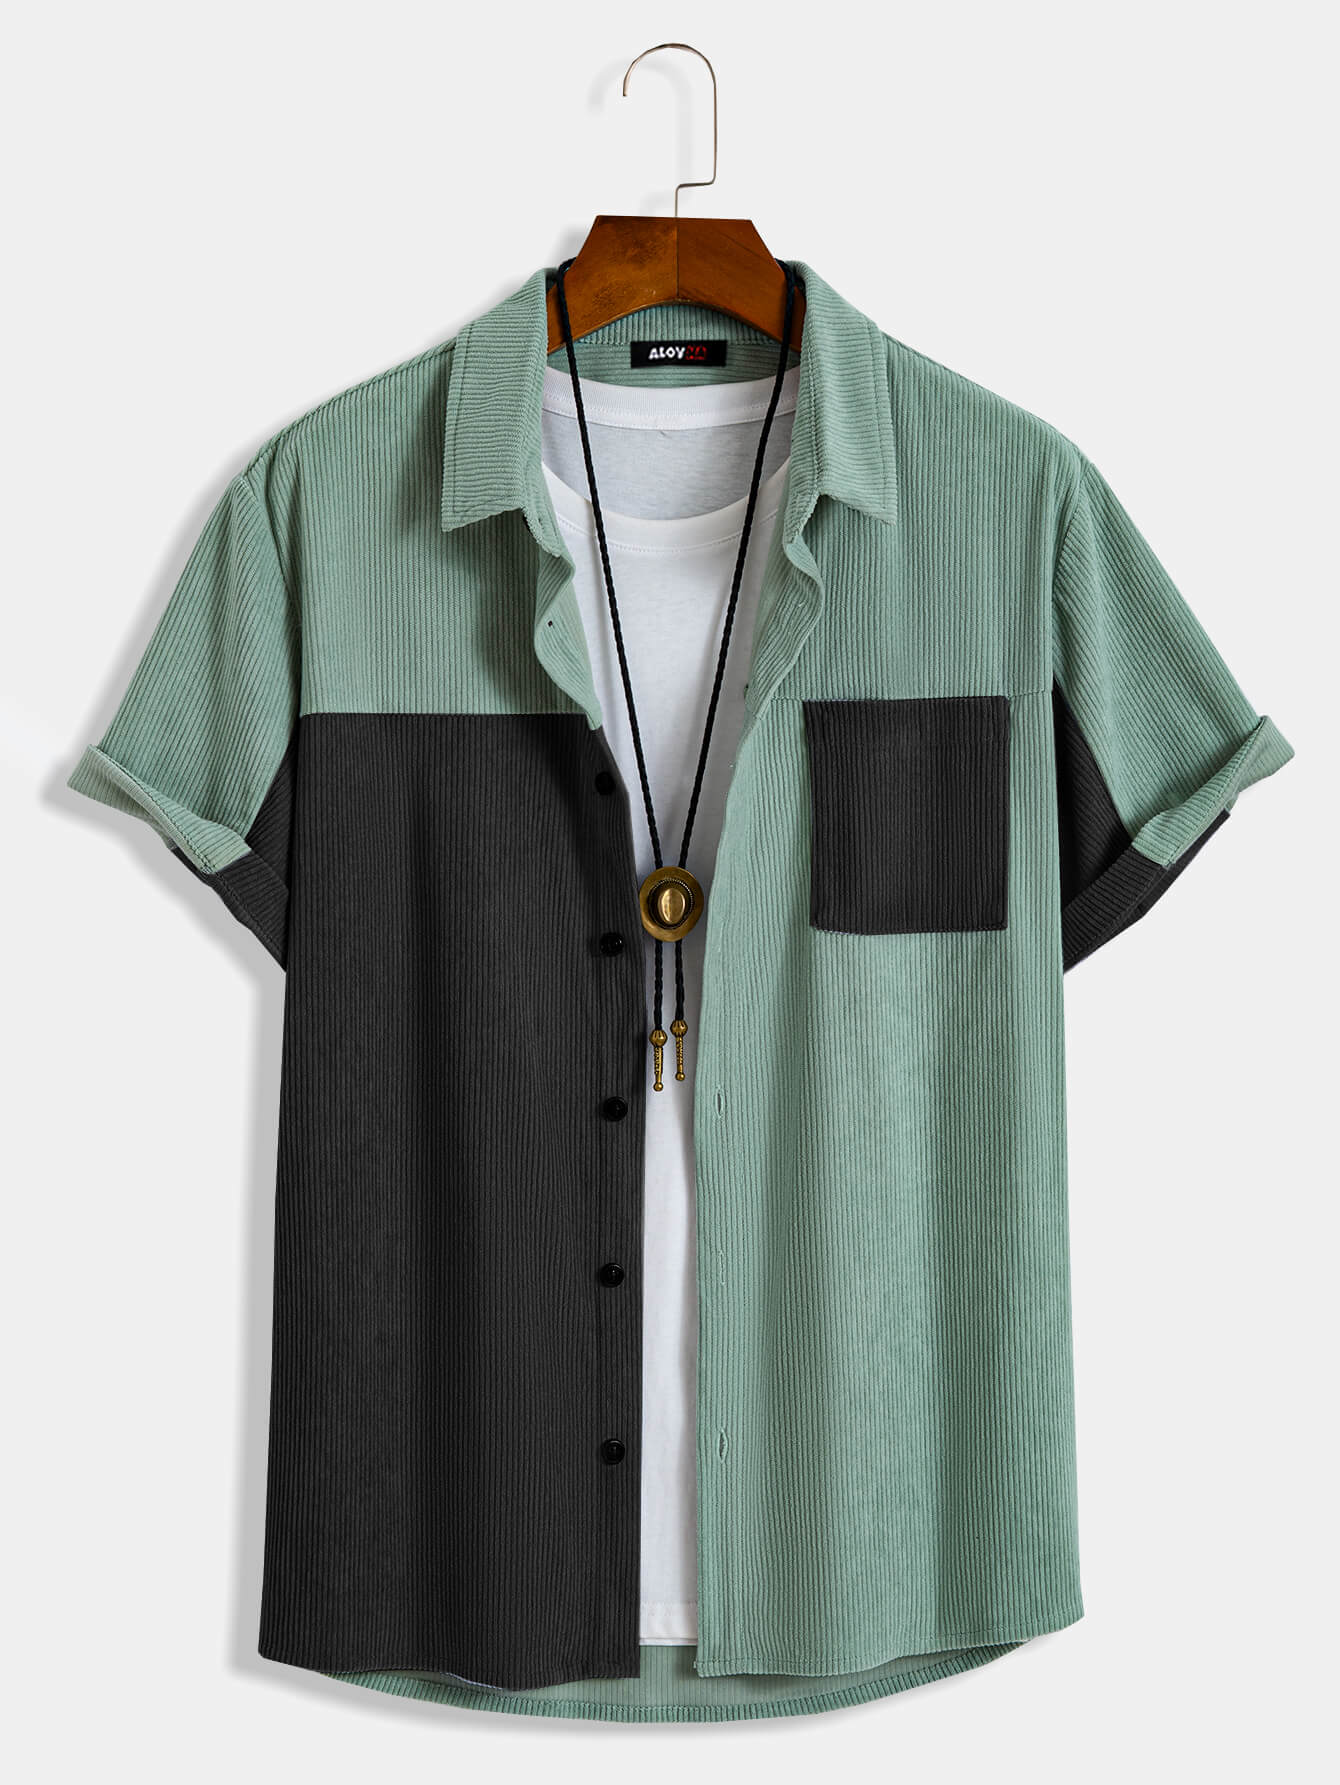 Men's Corduroy Black and Green Colorblock Short Sleeve Button Up Shirt